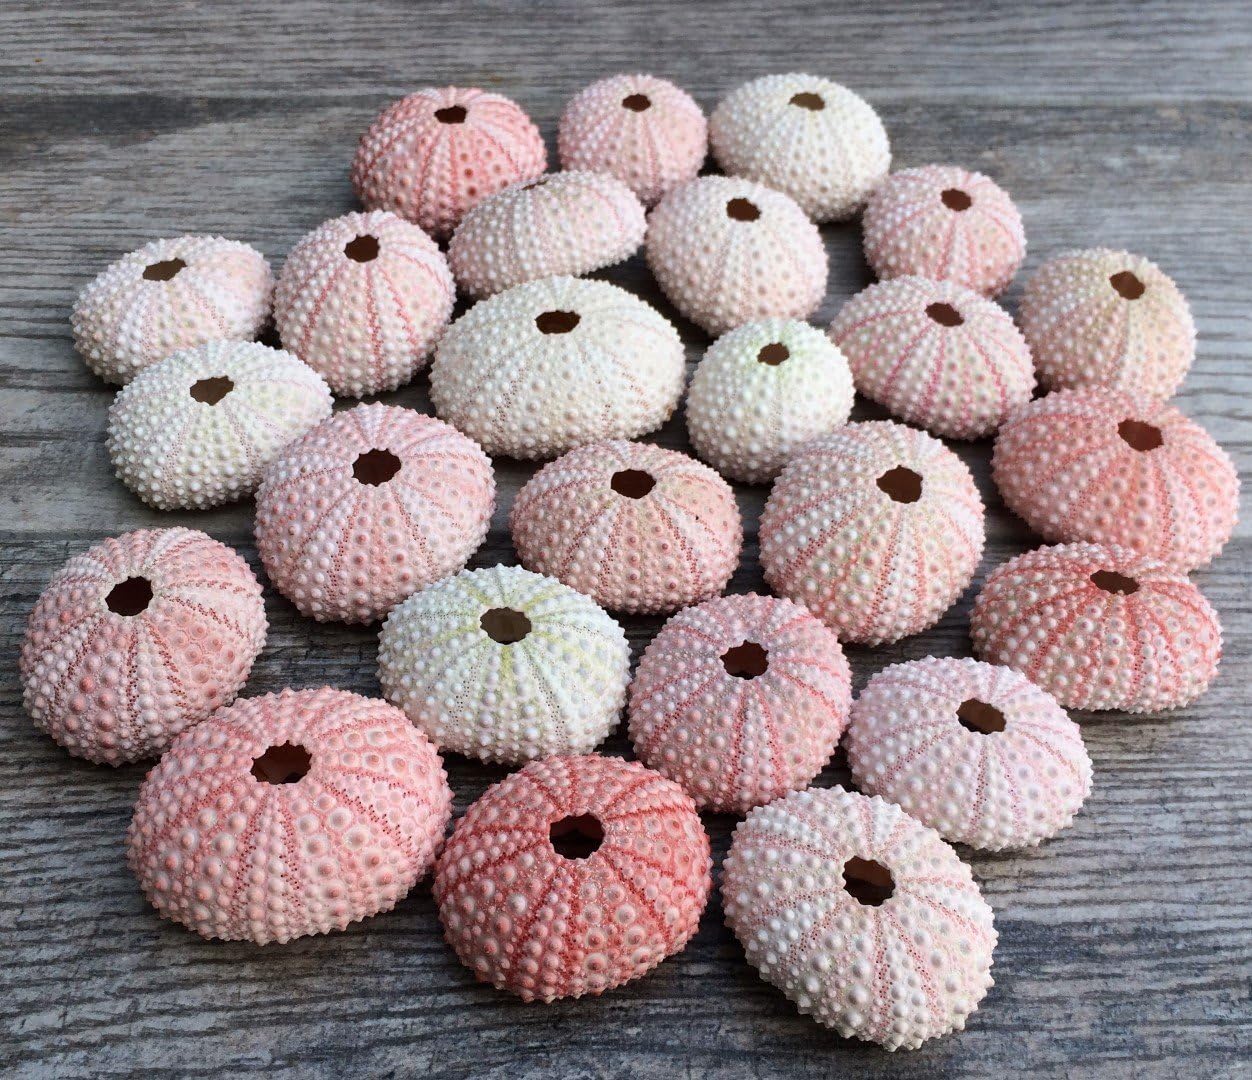 Sea Urchin Pink Sea Urchin Shells 1-2in (25 pk) Pink Sea Urchins for Craft and Decor